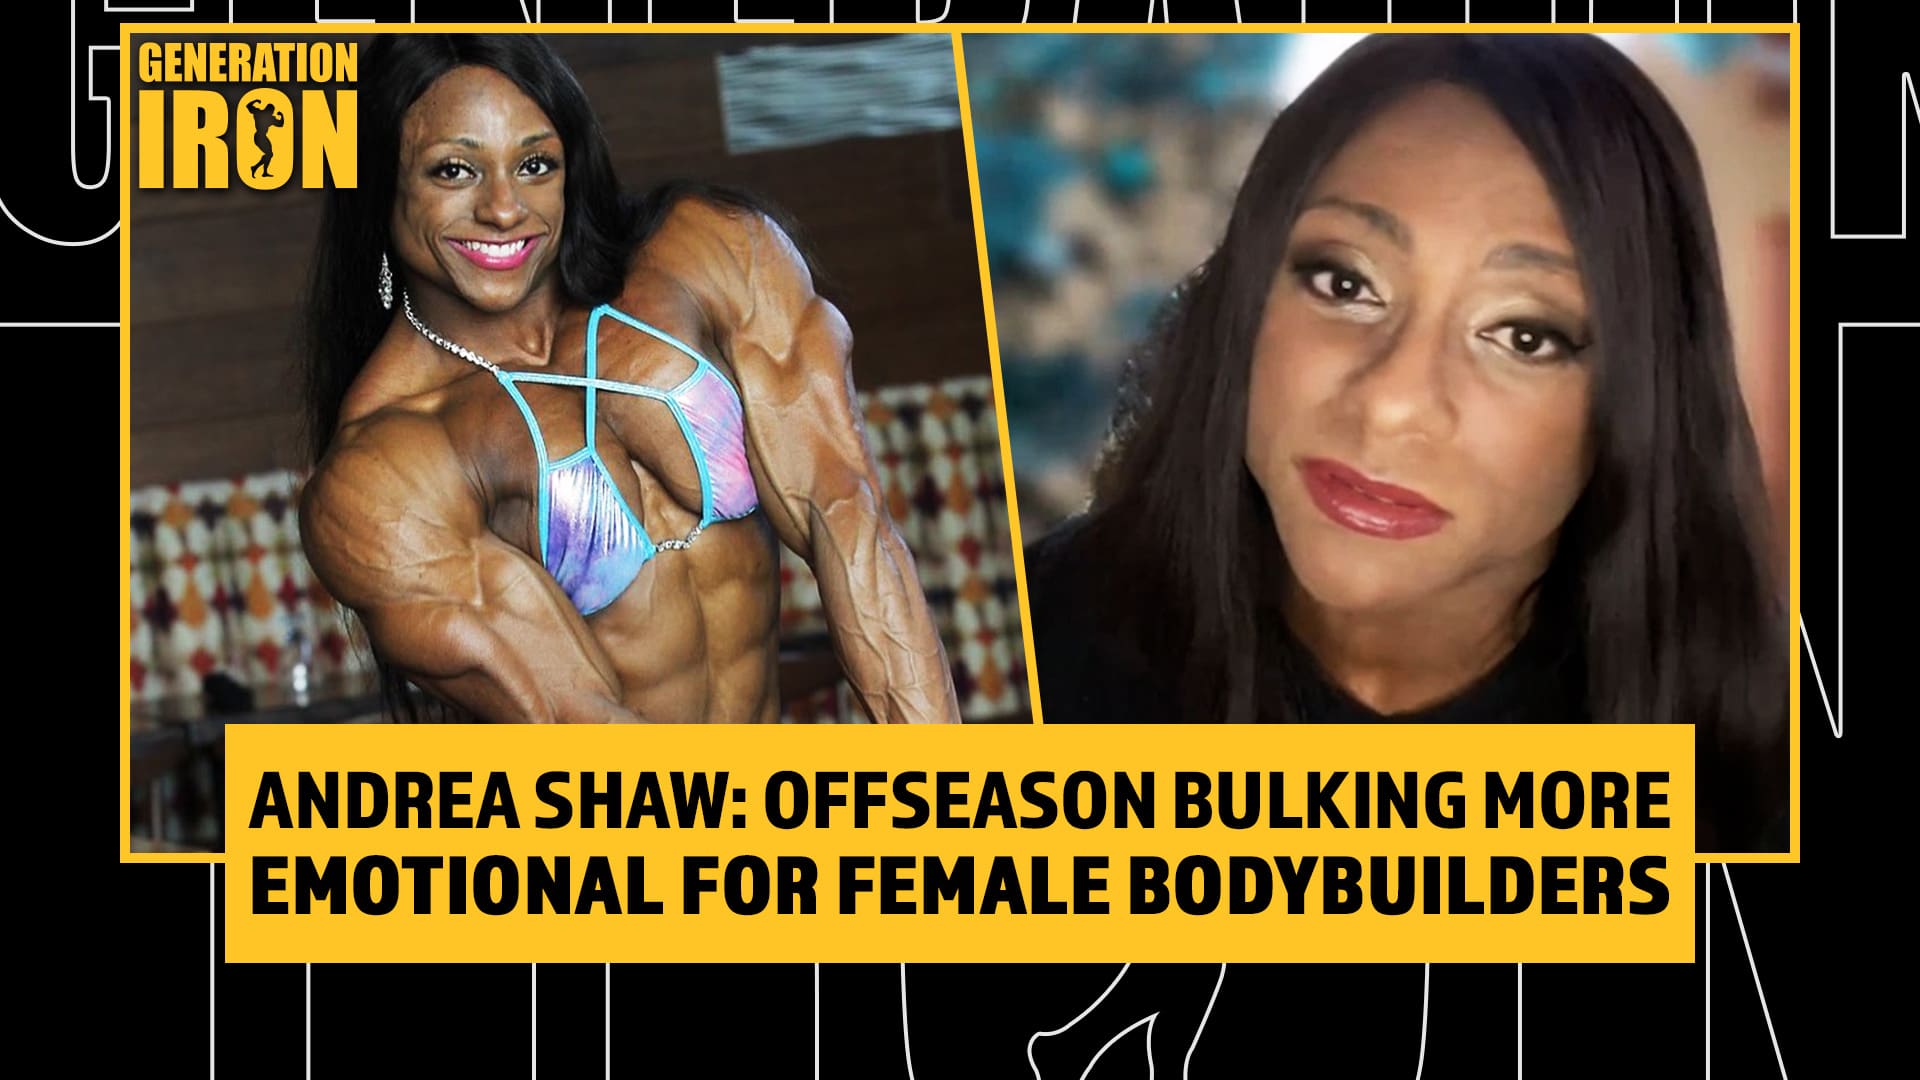 Andrea Shaw: How Offseason Bulking For Female Bodybuilders Is “Way More Emotional”